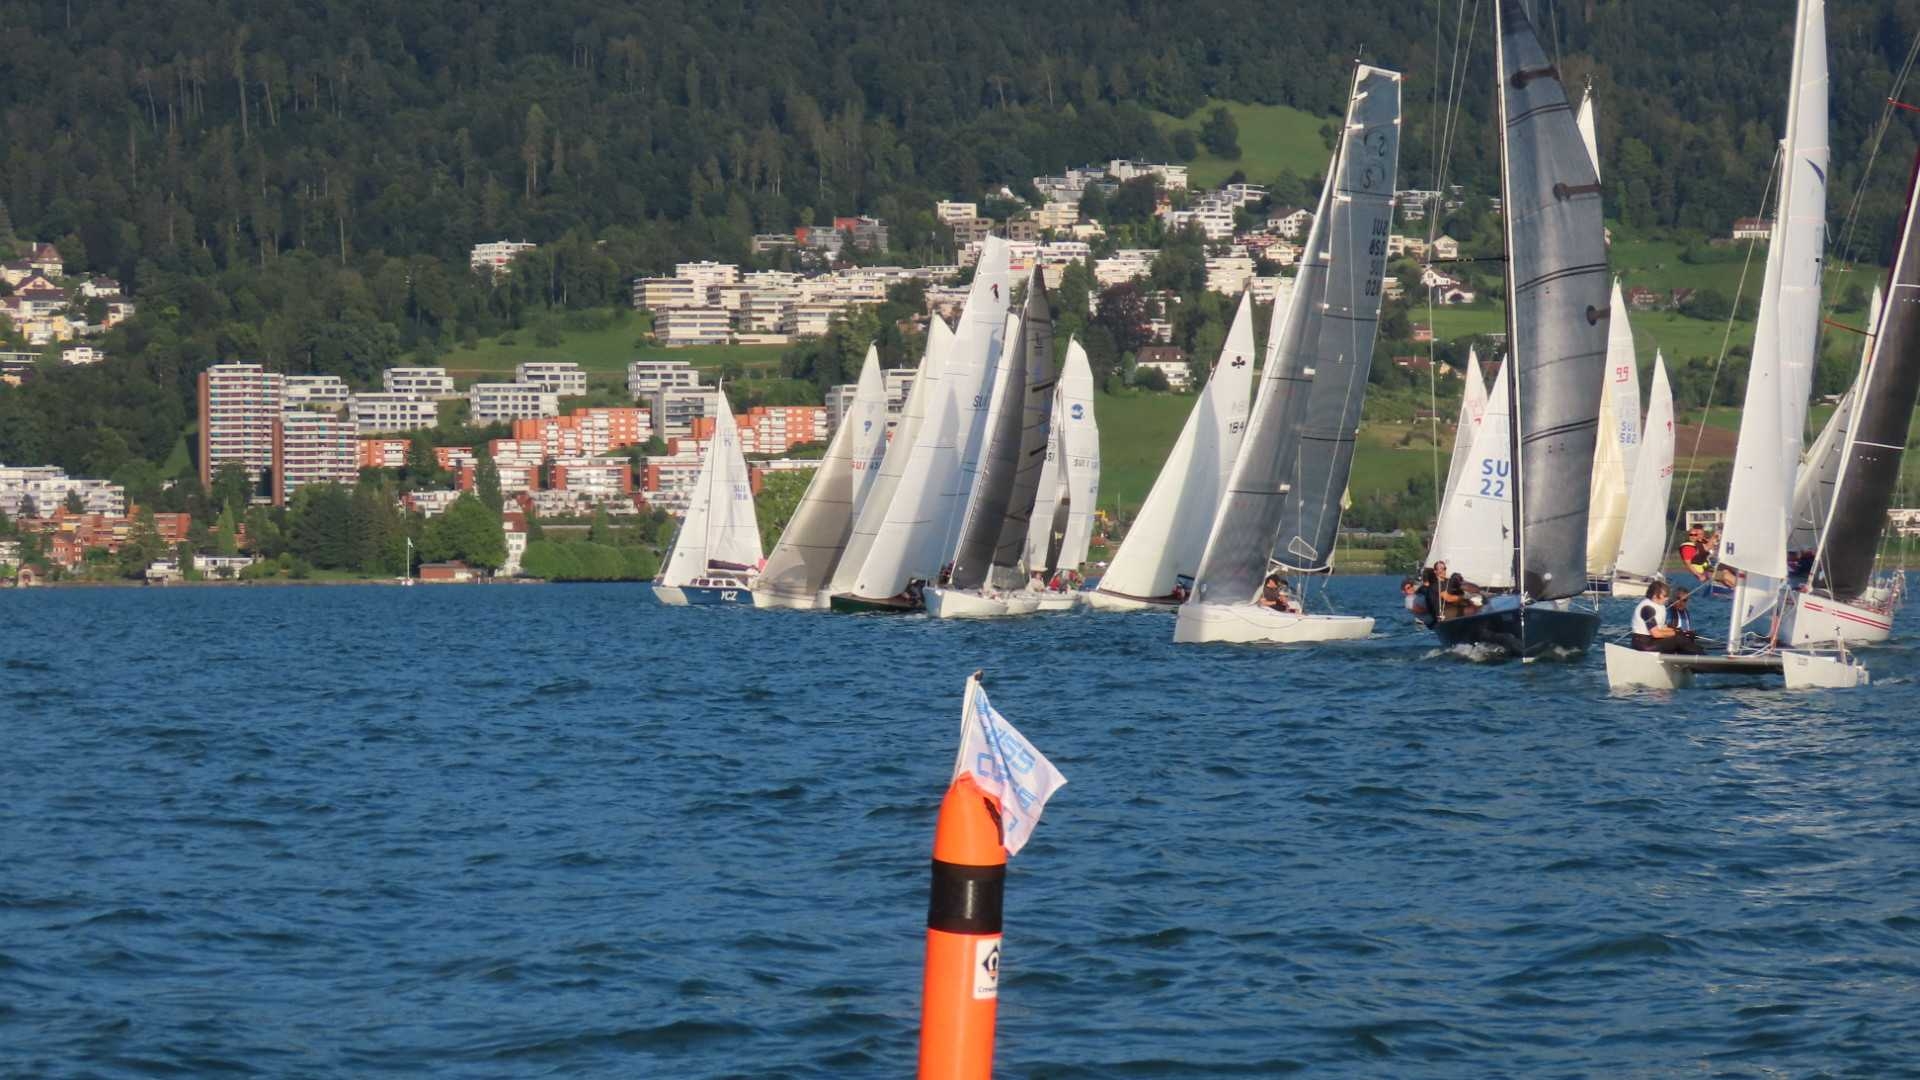  Weiss Yacht Cup  YC Zug  Day 4